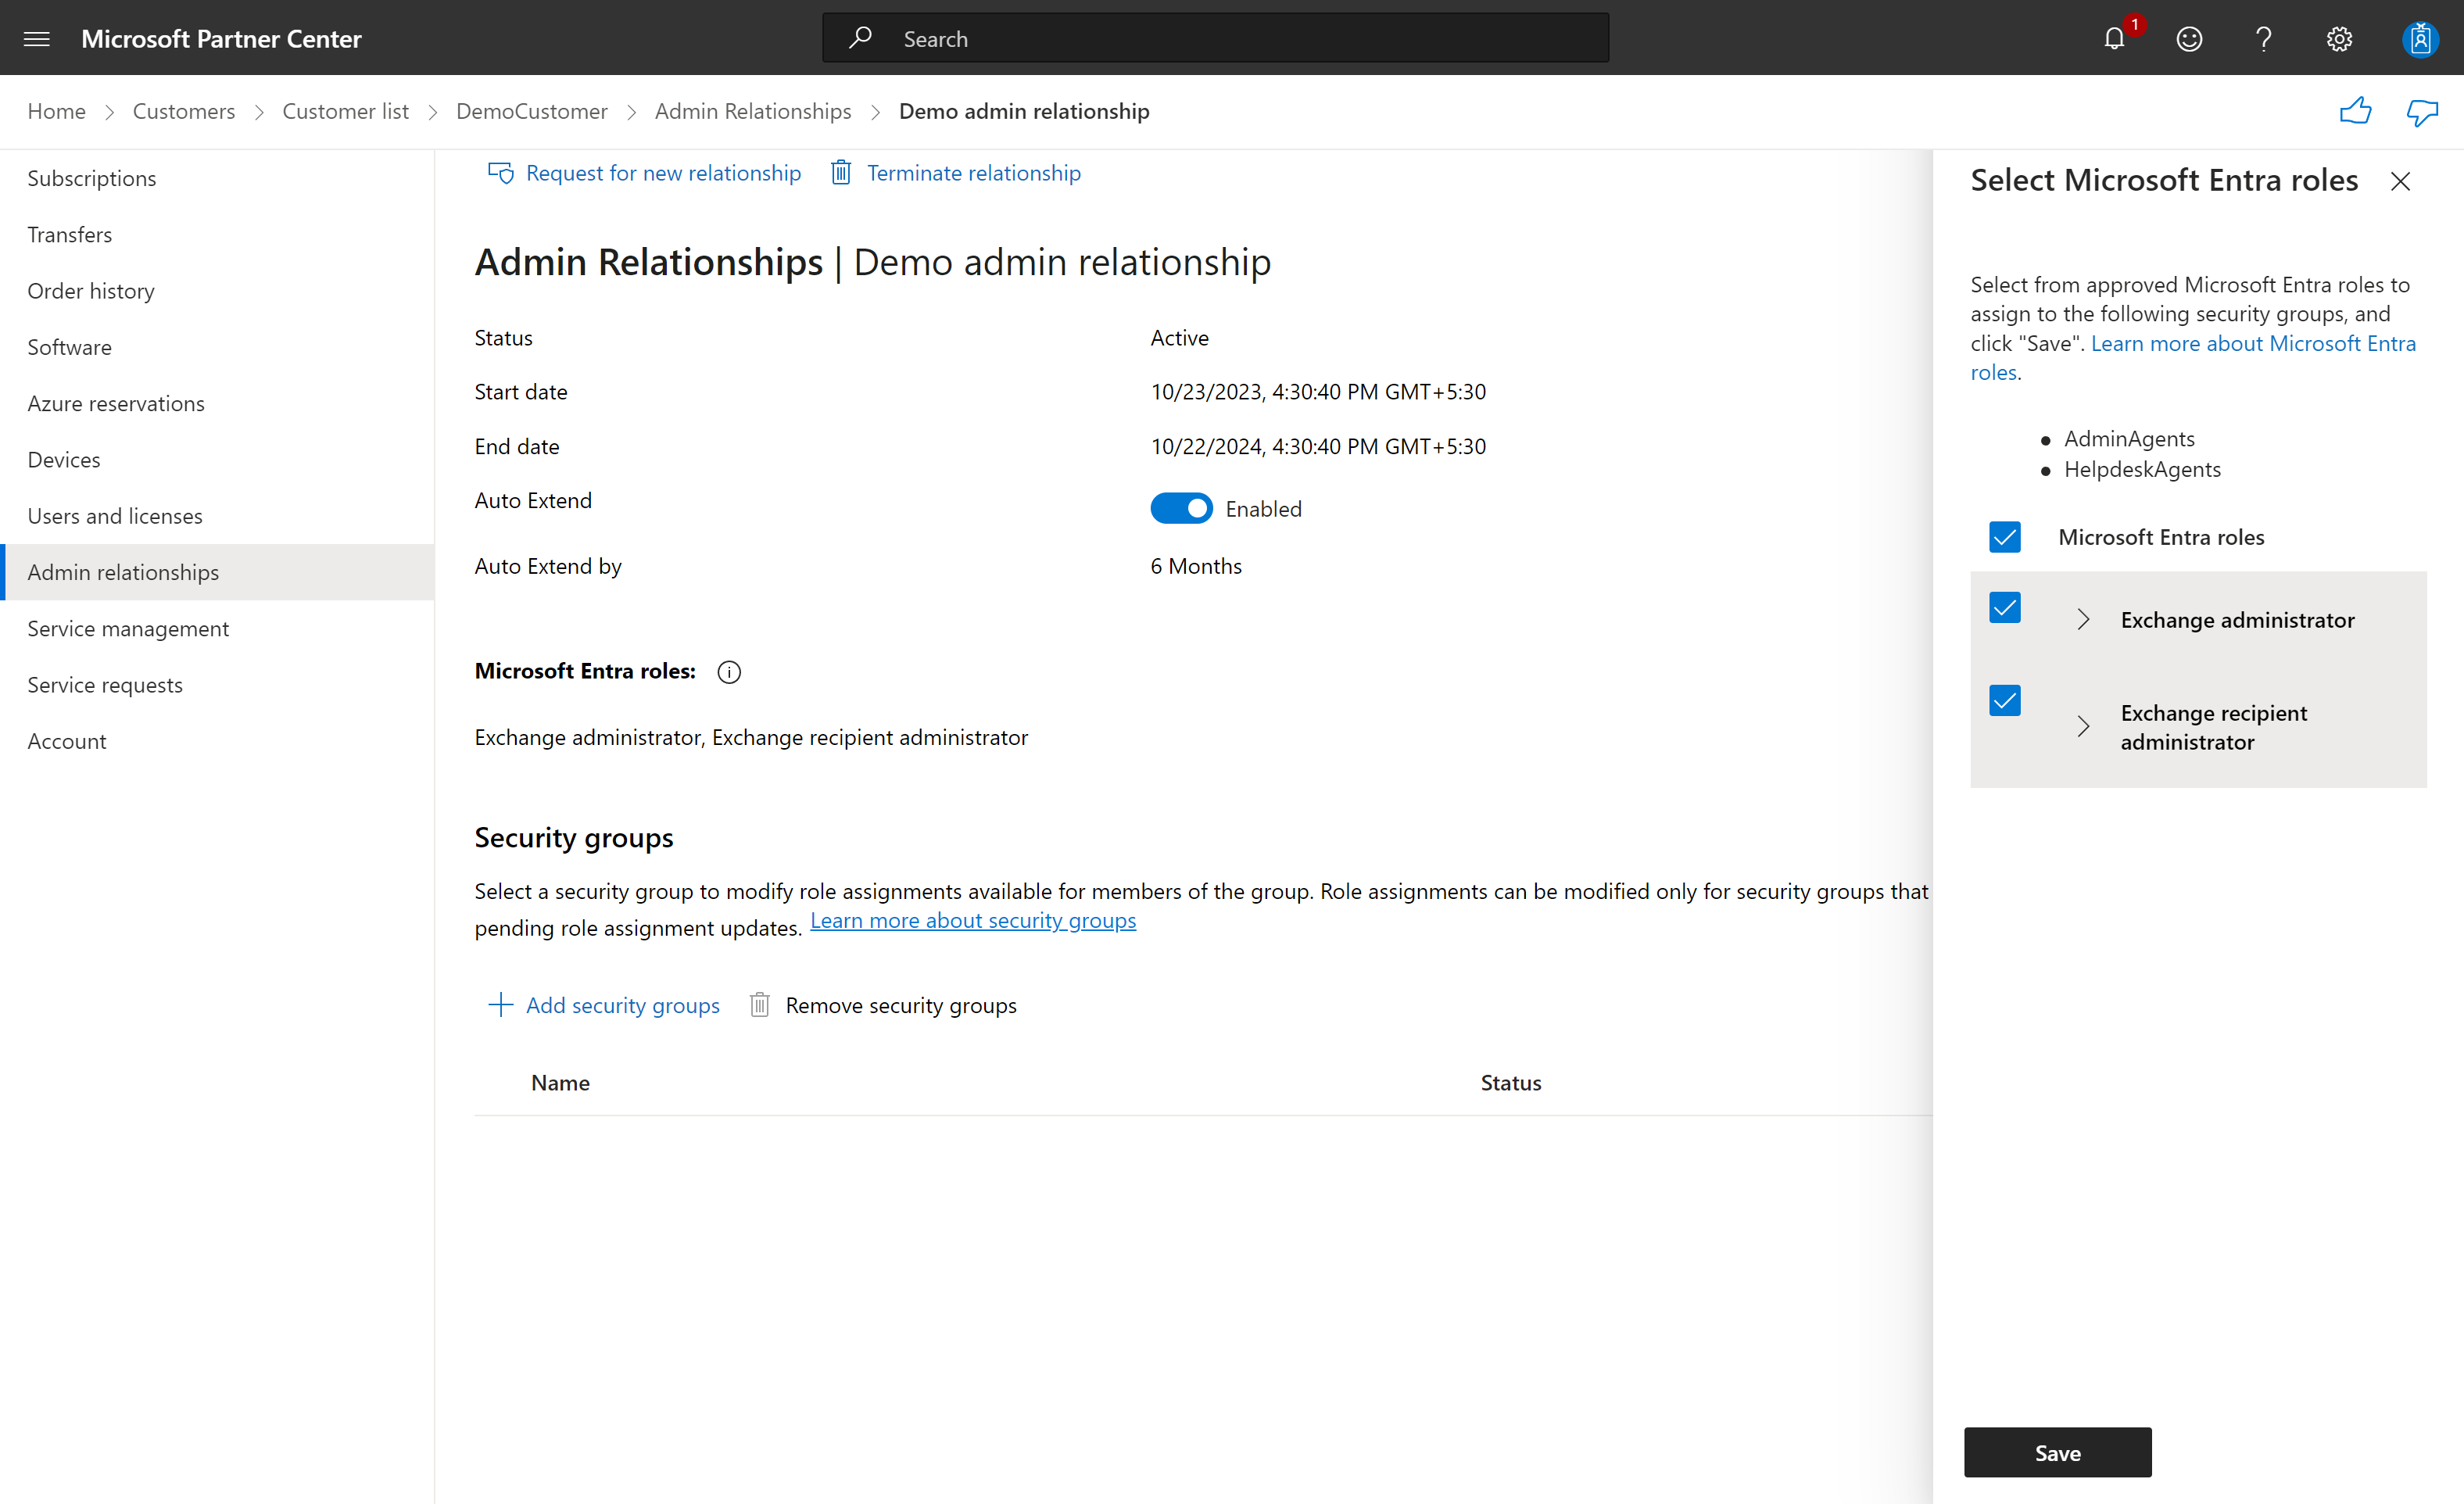 Screenshot depicting admin relationship details security group page with selected Microsoft Entra roles.